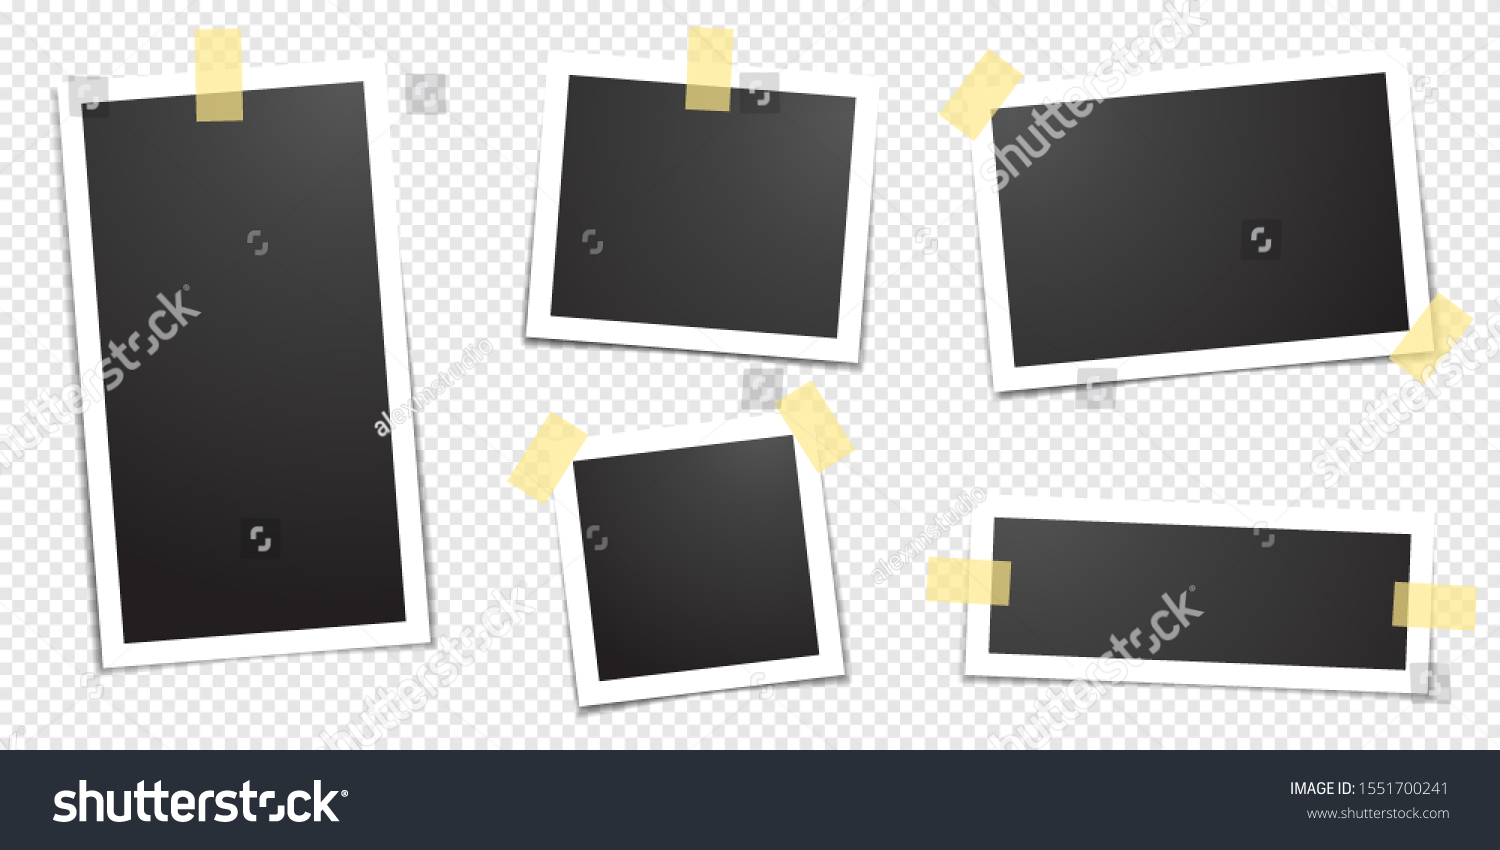 photo frames fixed with adhesive tape on a transparent background. Photo frame on sticky tape, isolated.
 #1551700241